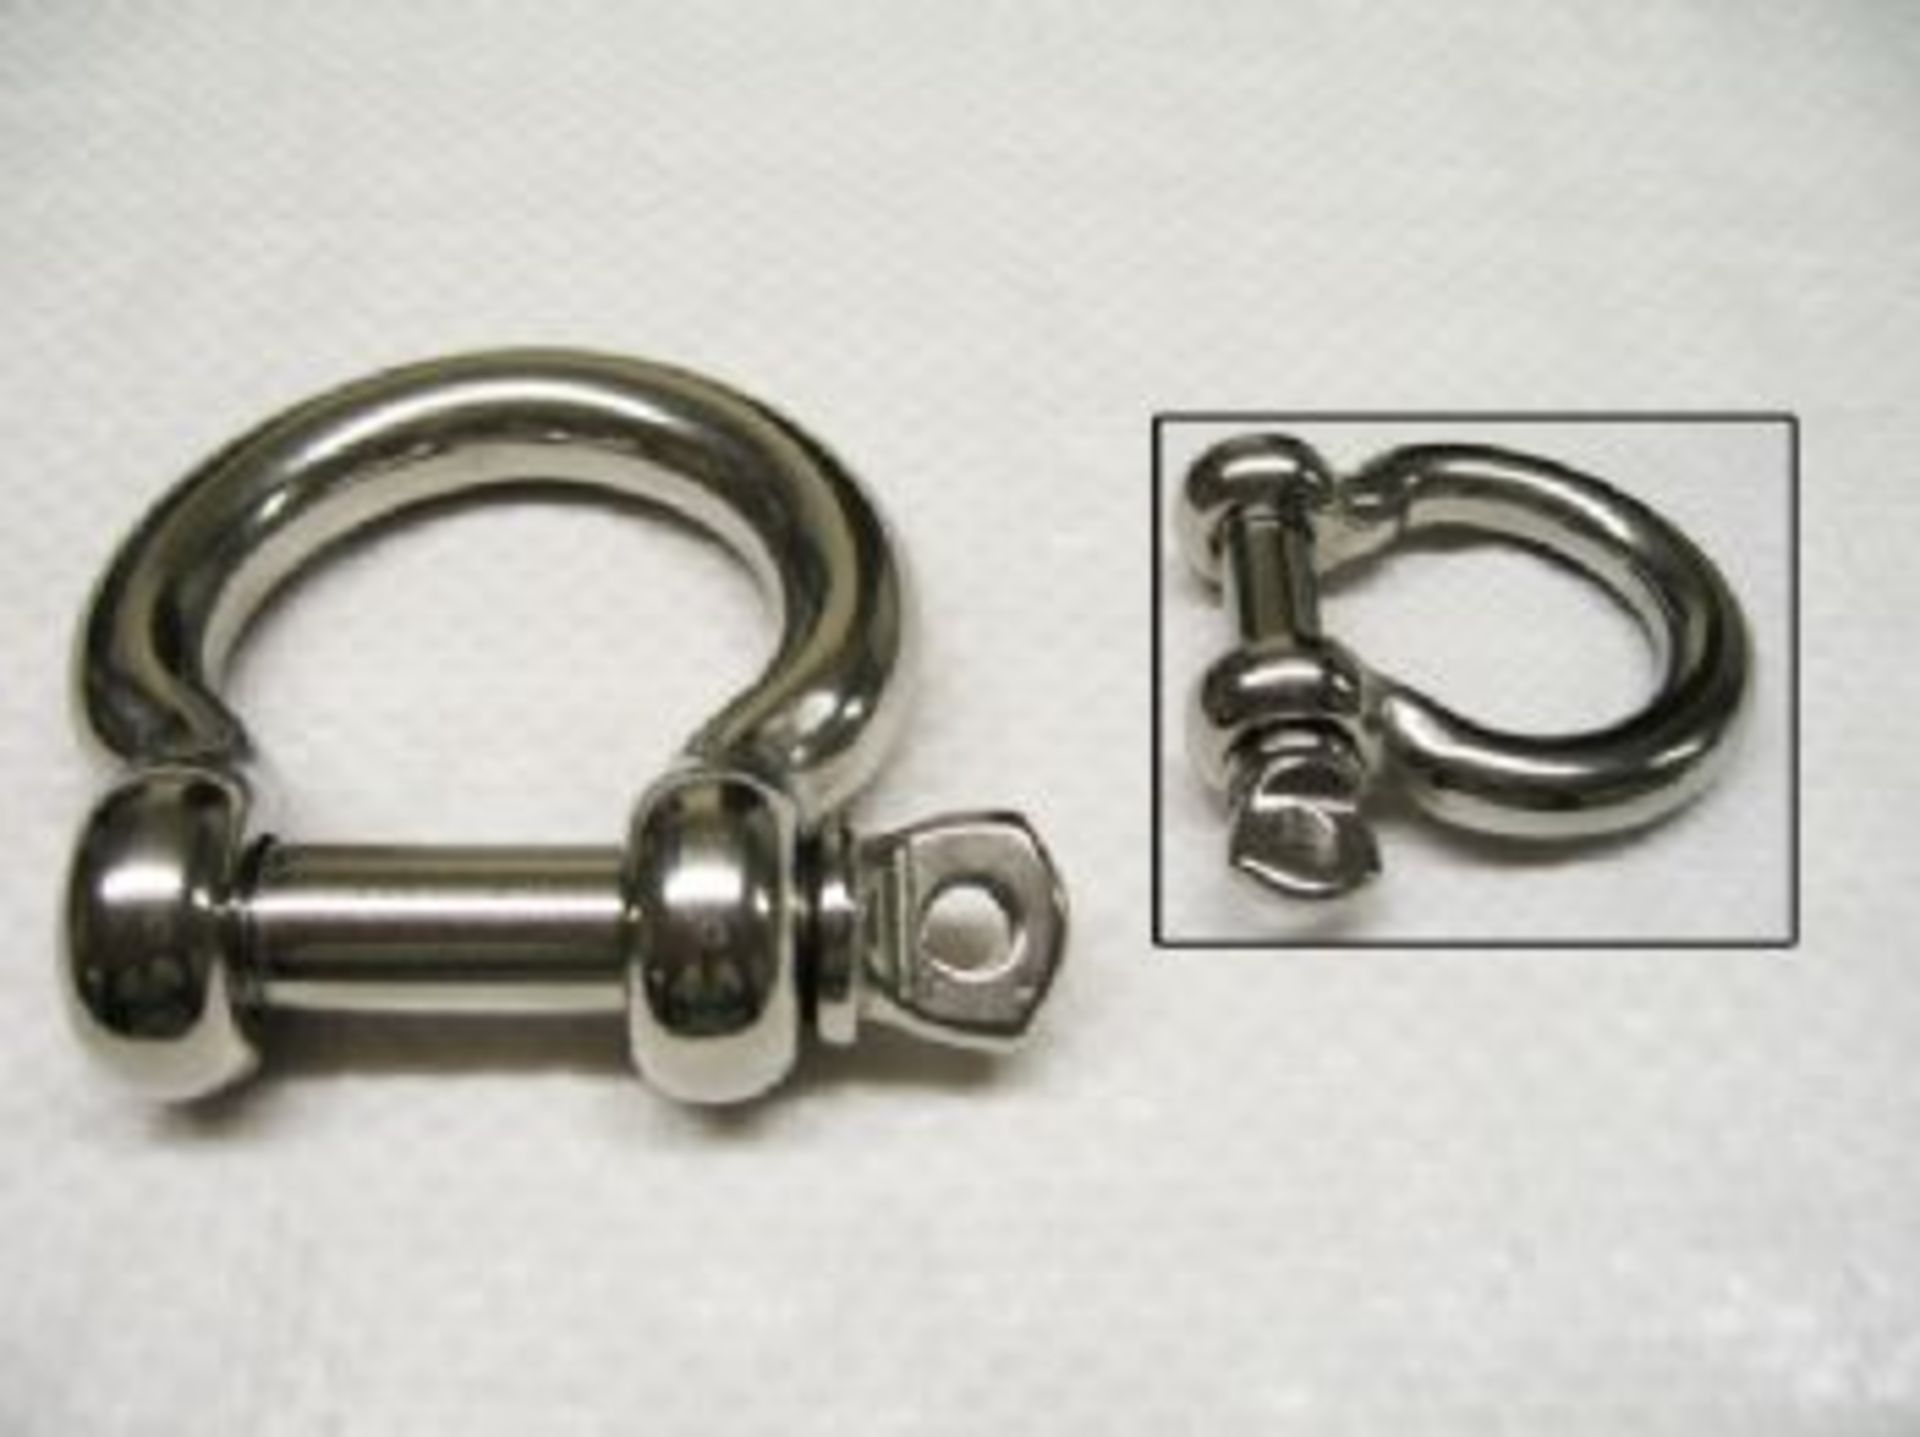 50PCS X 8MM STAINLESS STEEL Bow Shackle With Screw Collar Pin - BRAND NEW
Shackle And Pin DIA - 8MM